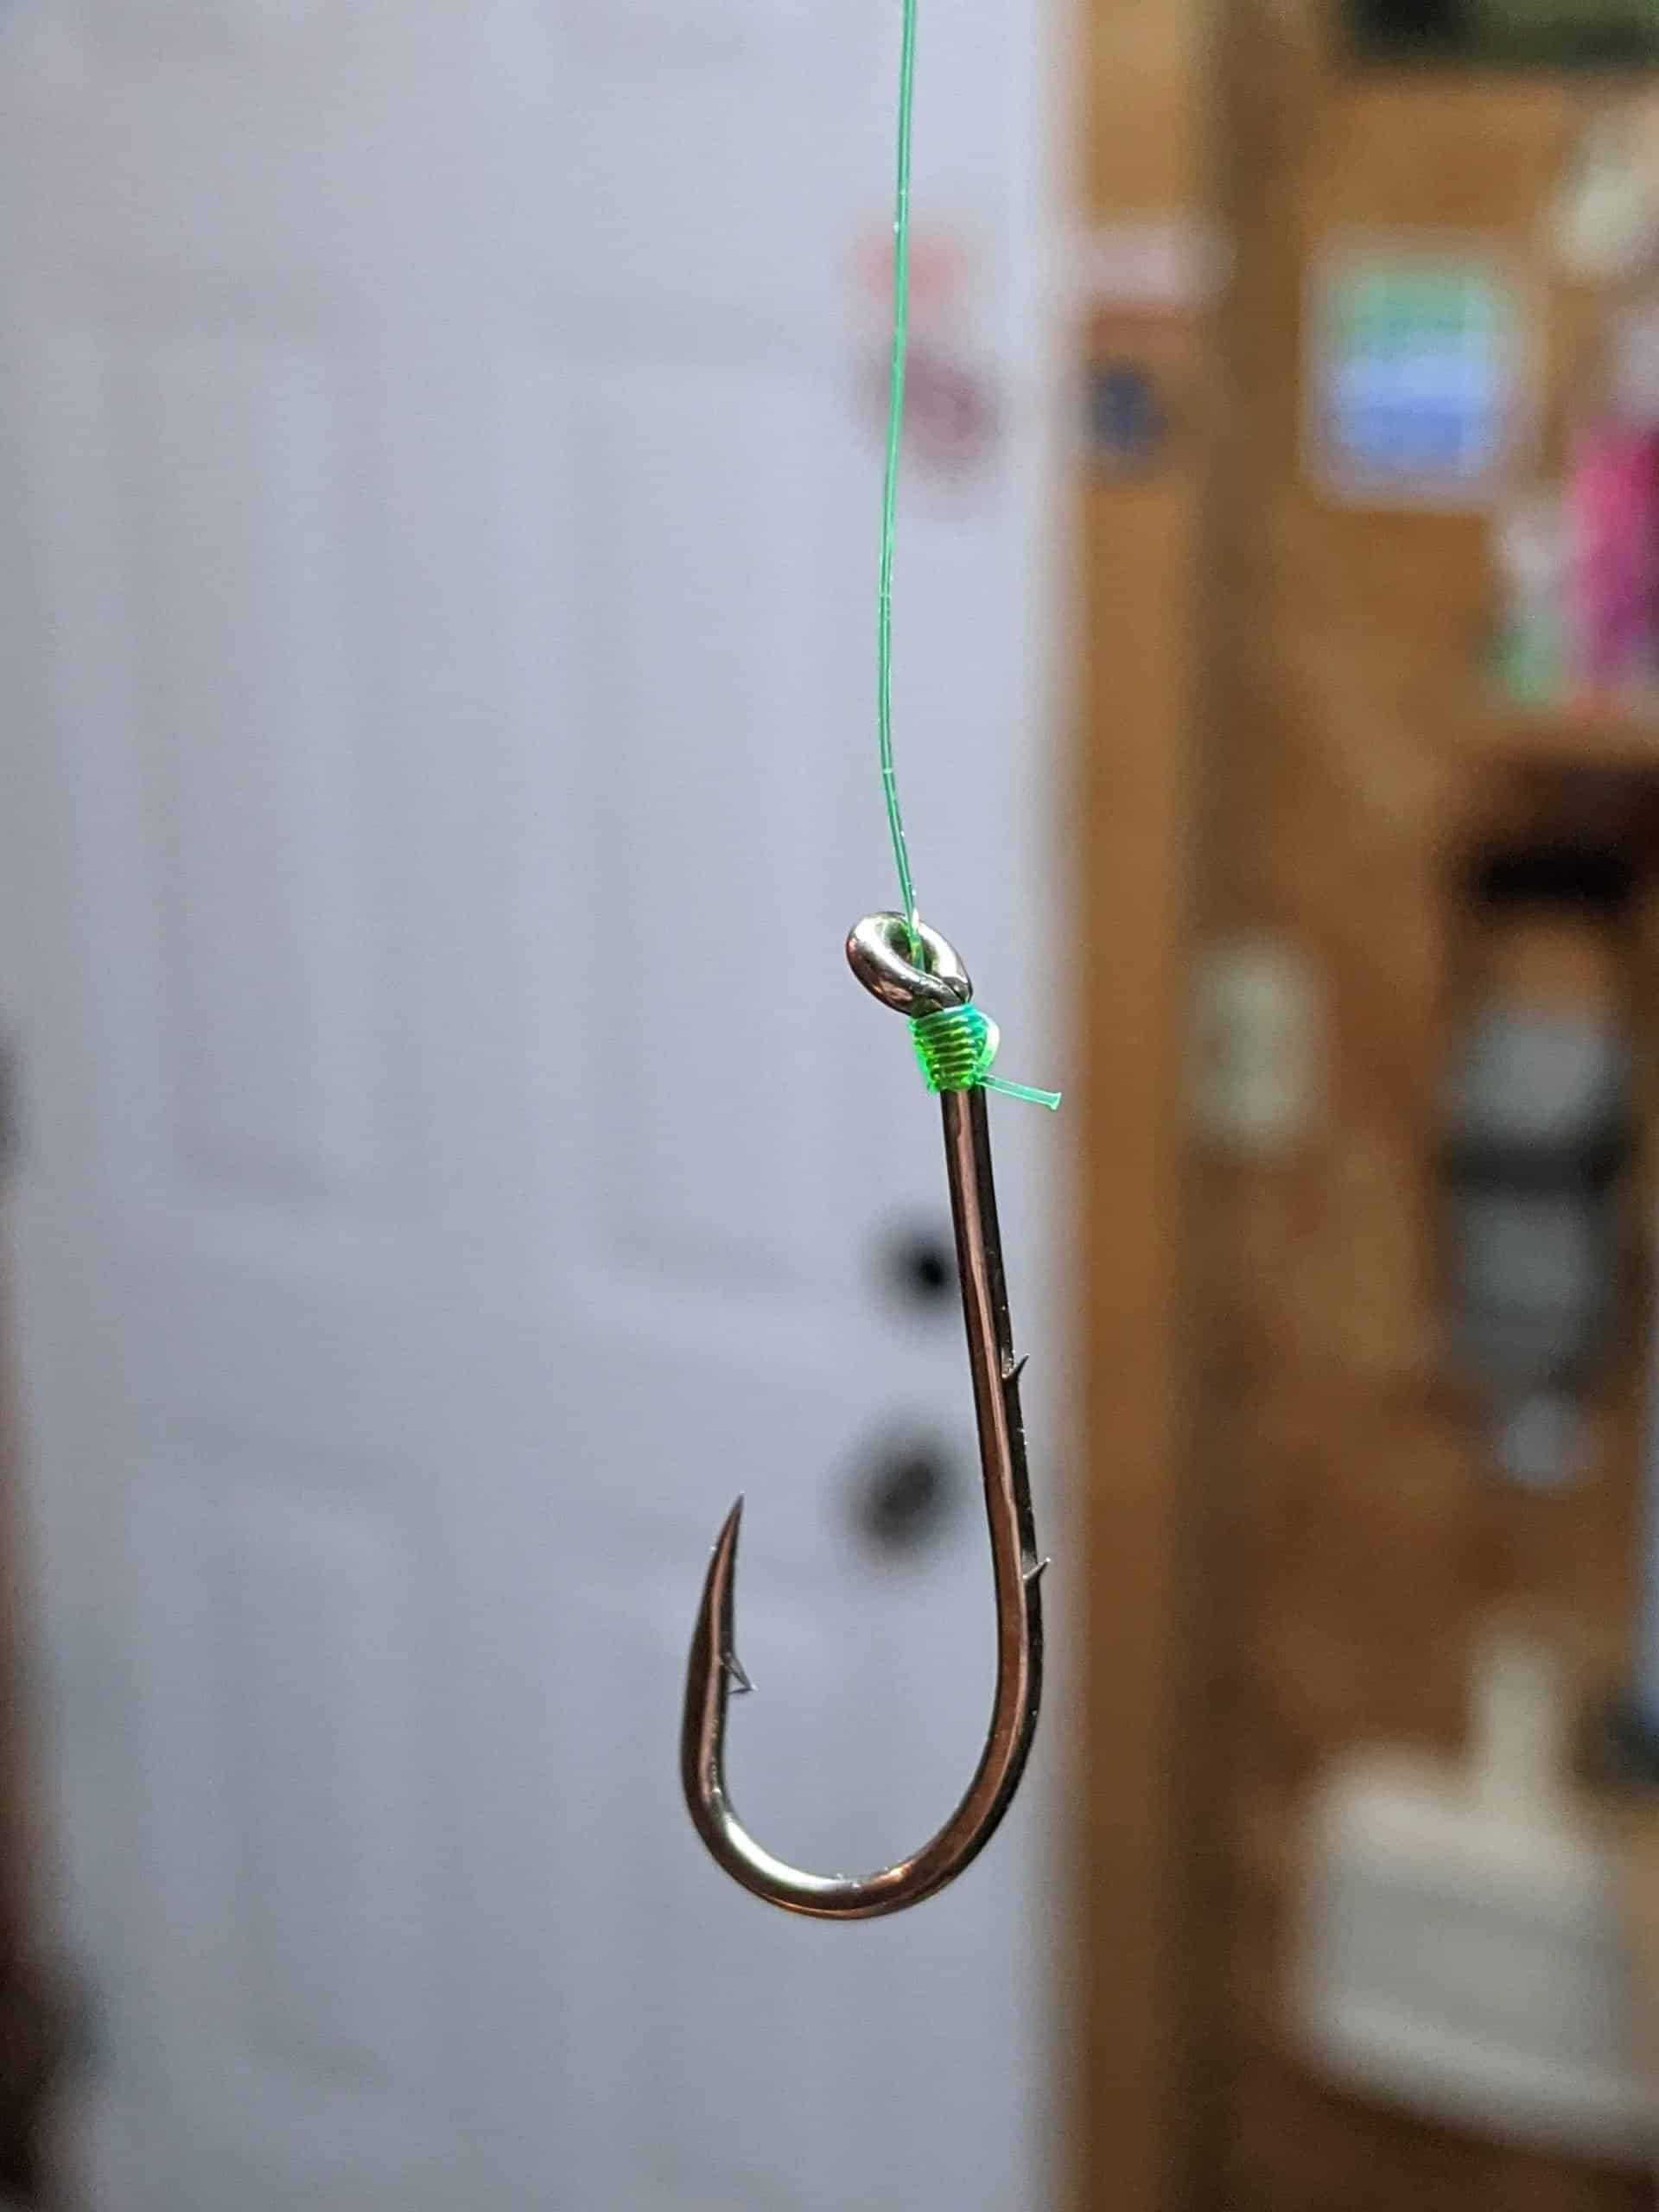 How To Tie A Snell Knot In 4 Easy Steps - Learn Fishing Knots